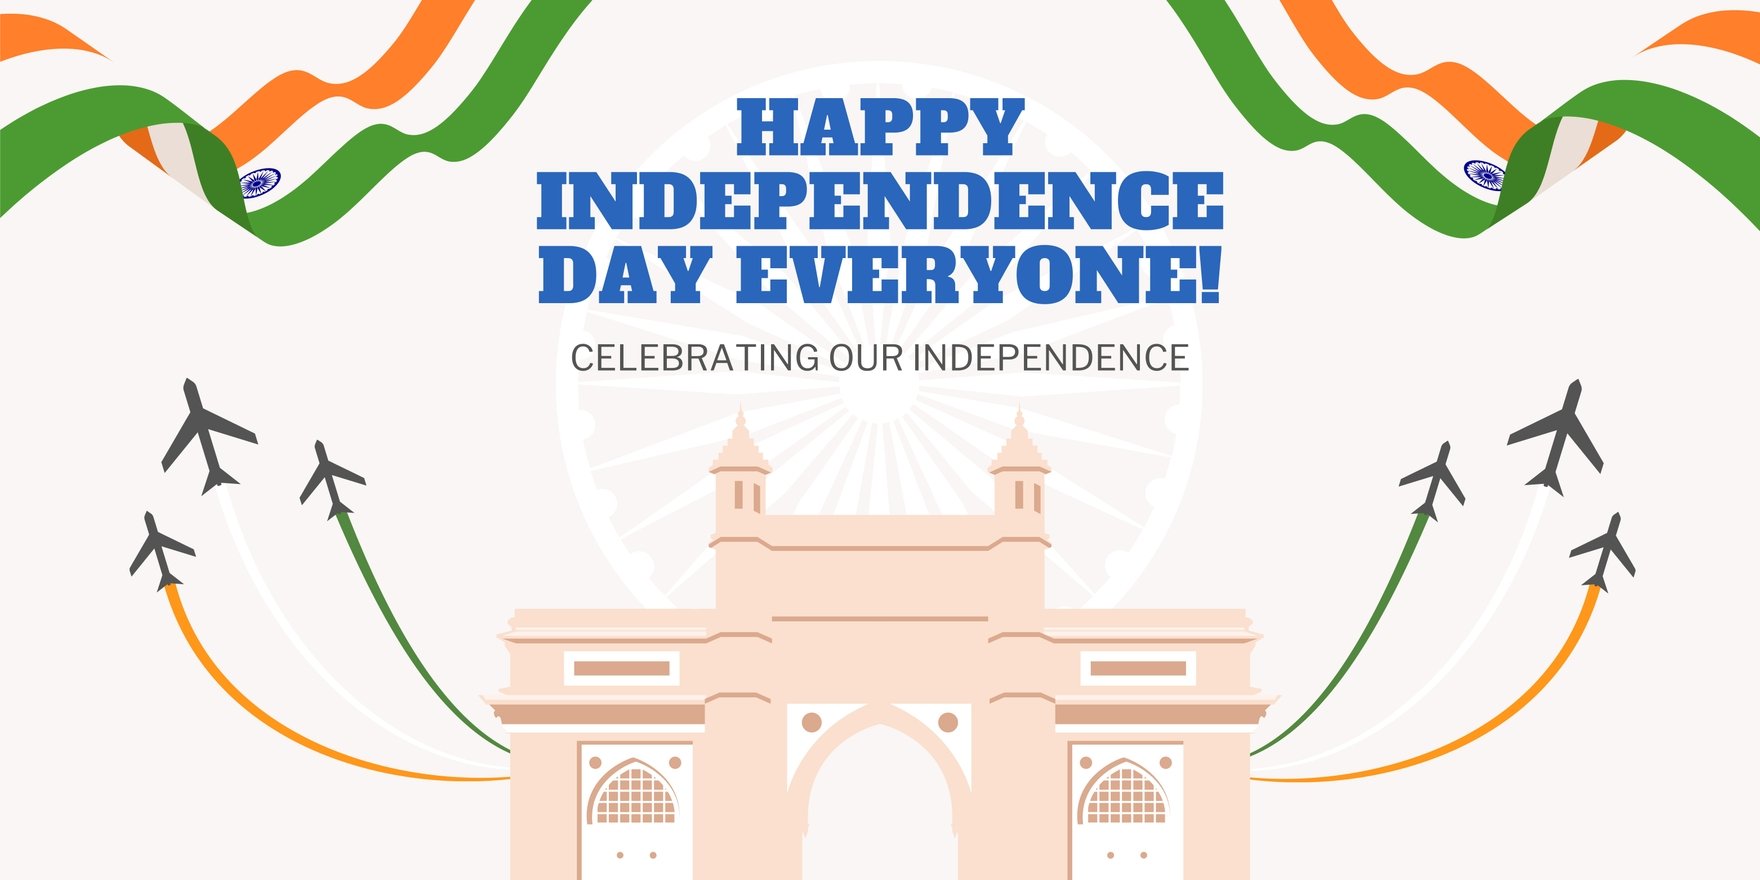 Modern India Independence Day Banner in Word, Google Docs, Illustrator, PSD, Apple Pages, Publisher